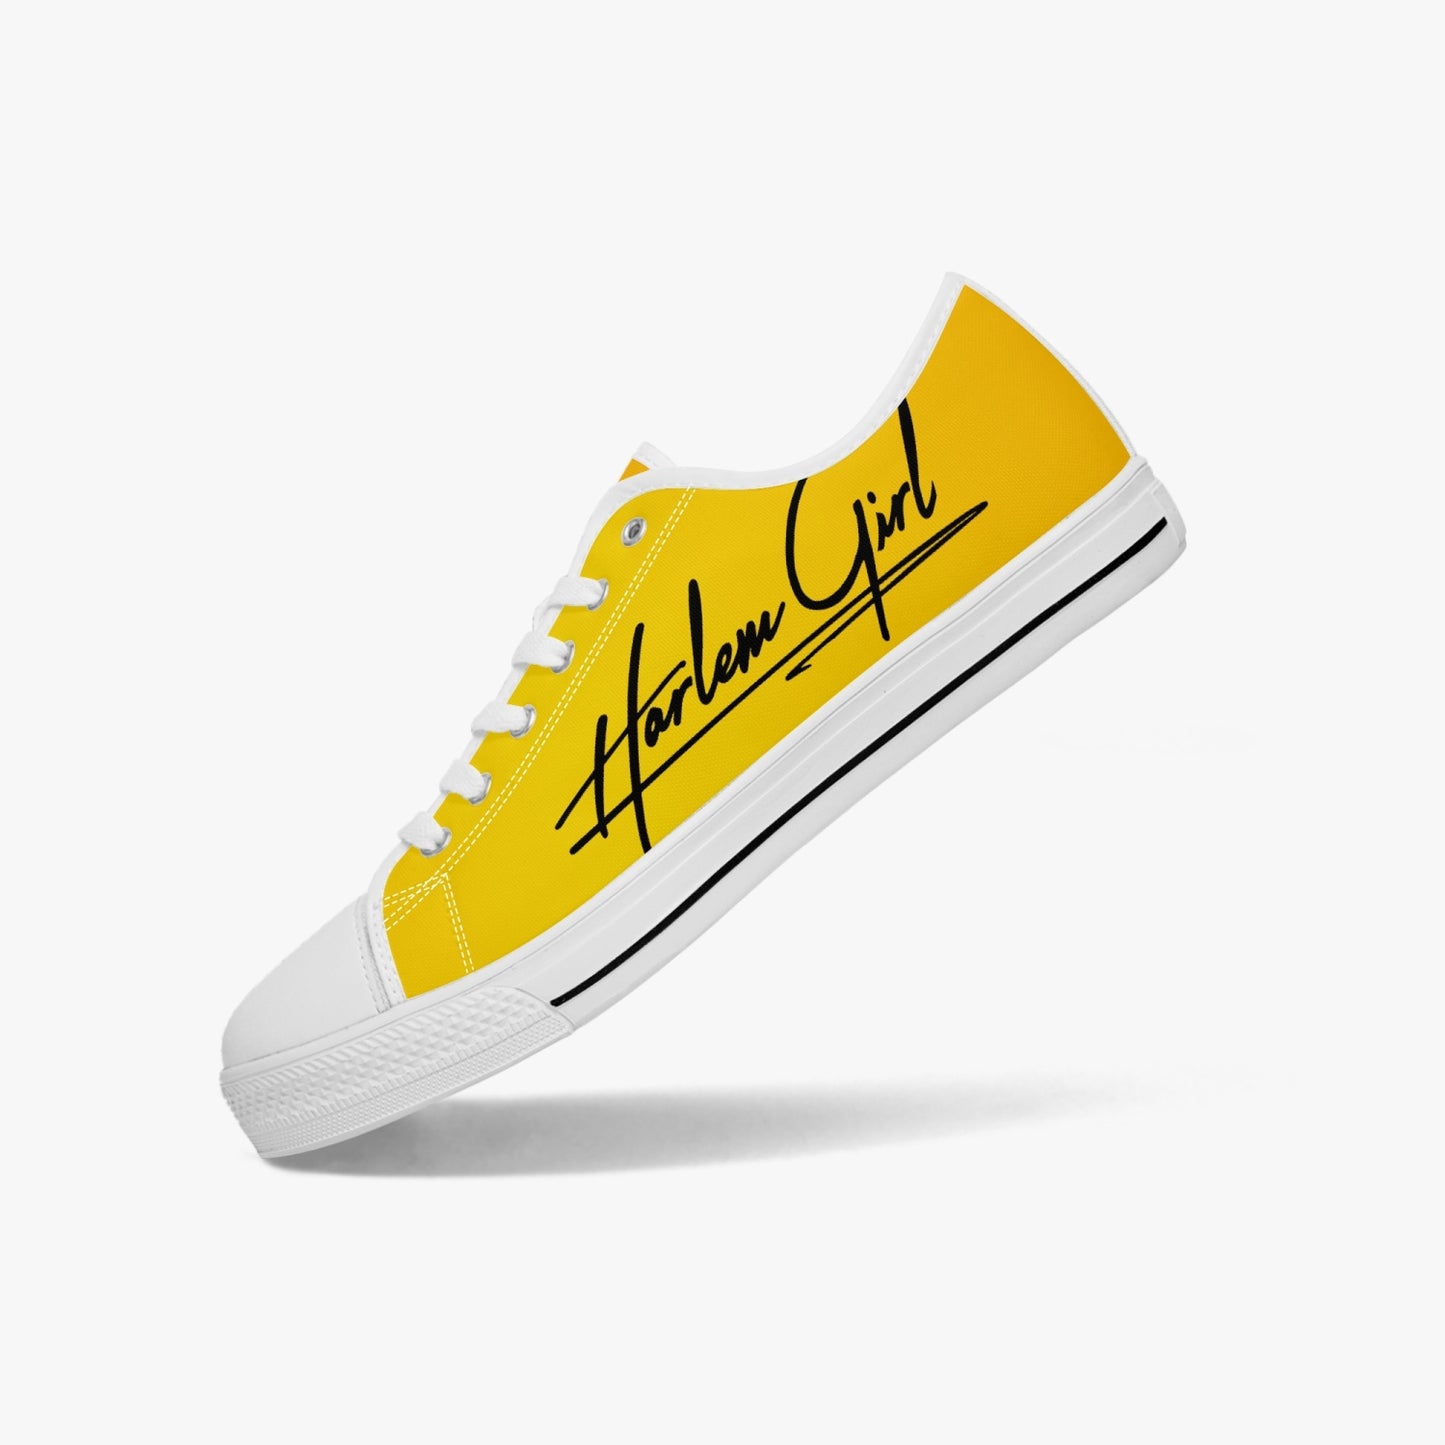 HB Harlem Girl "Lenox Ave" Classic Low Tops - Gold - Women (Black or White Sole)